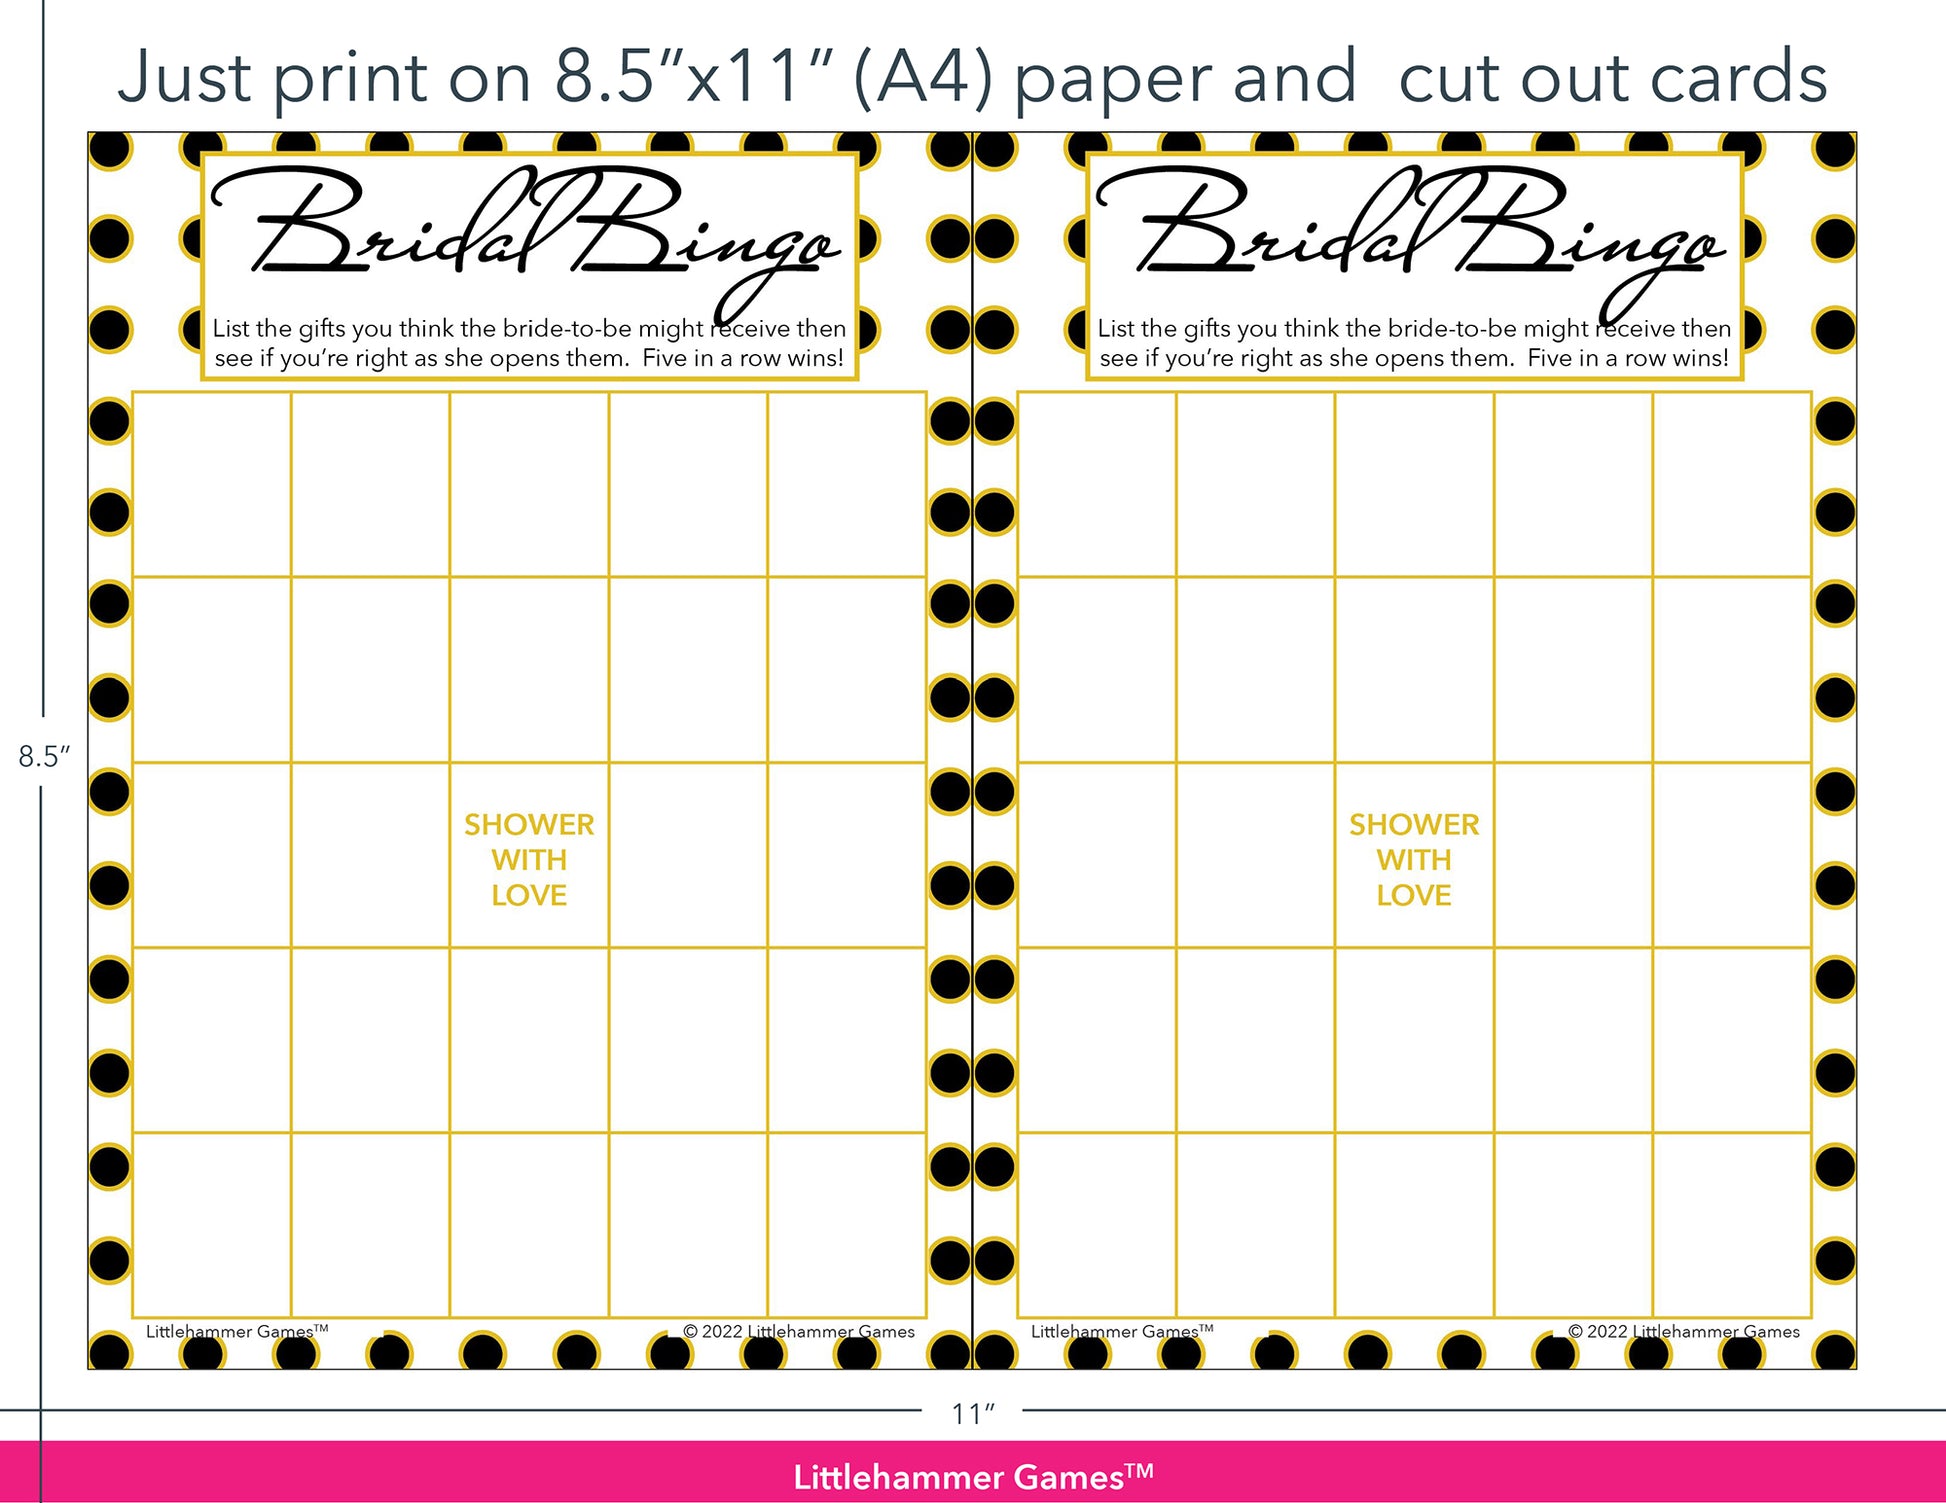 Black and gold polka dot Bridal Gift Bingo game cards with printing instructions